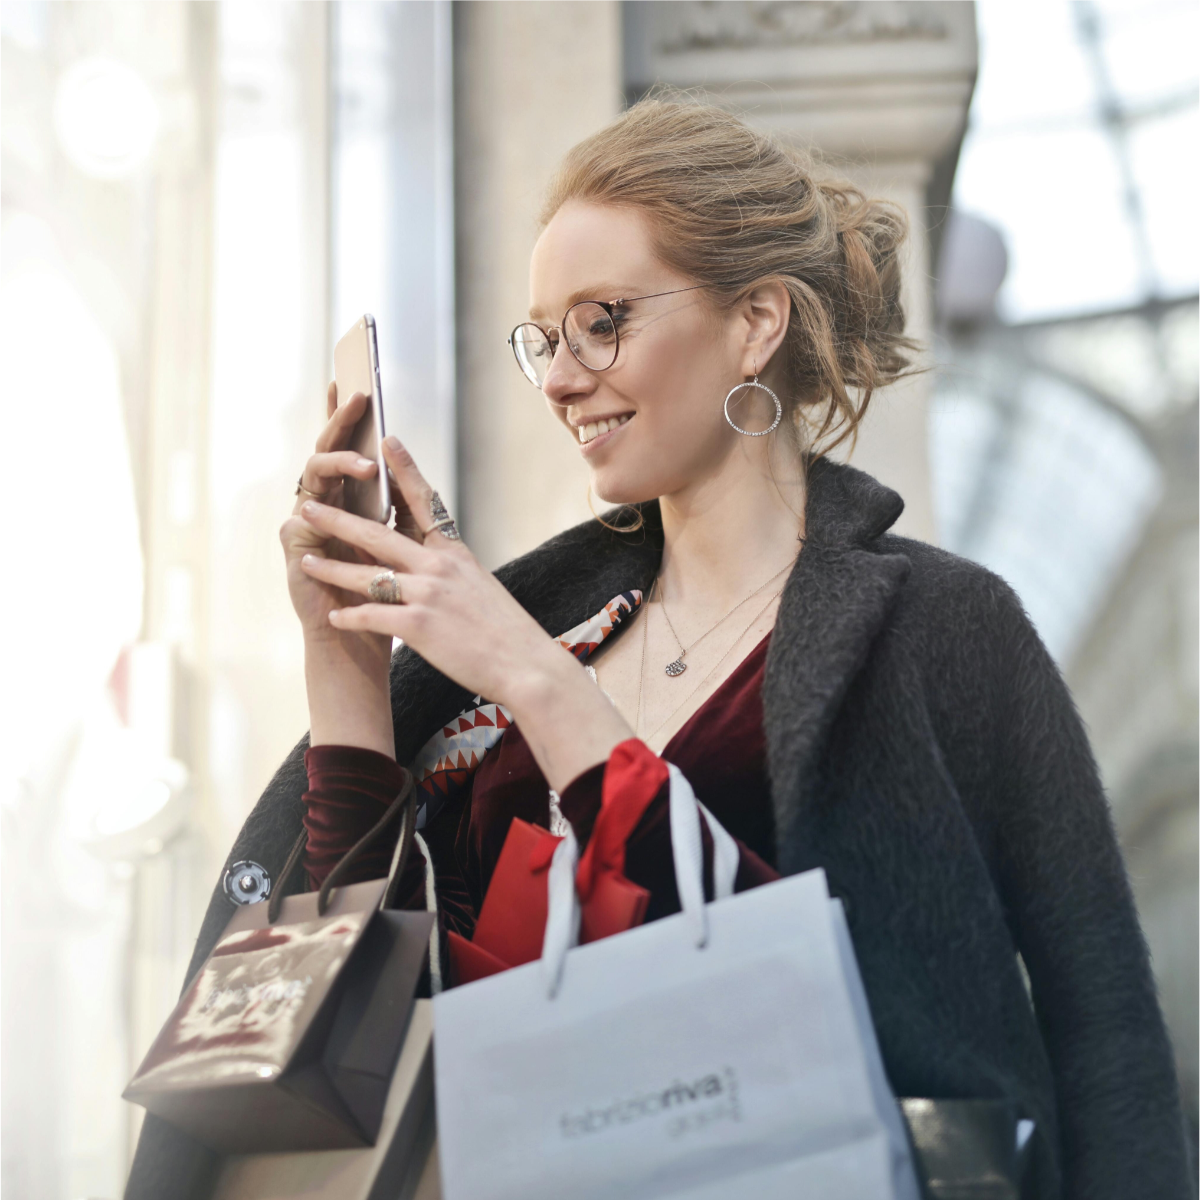 Woman wearing glasses with lots of shopping bags draped on her arms looks at her mobile device and smiles.